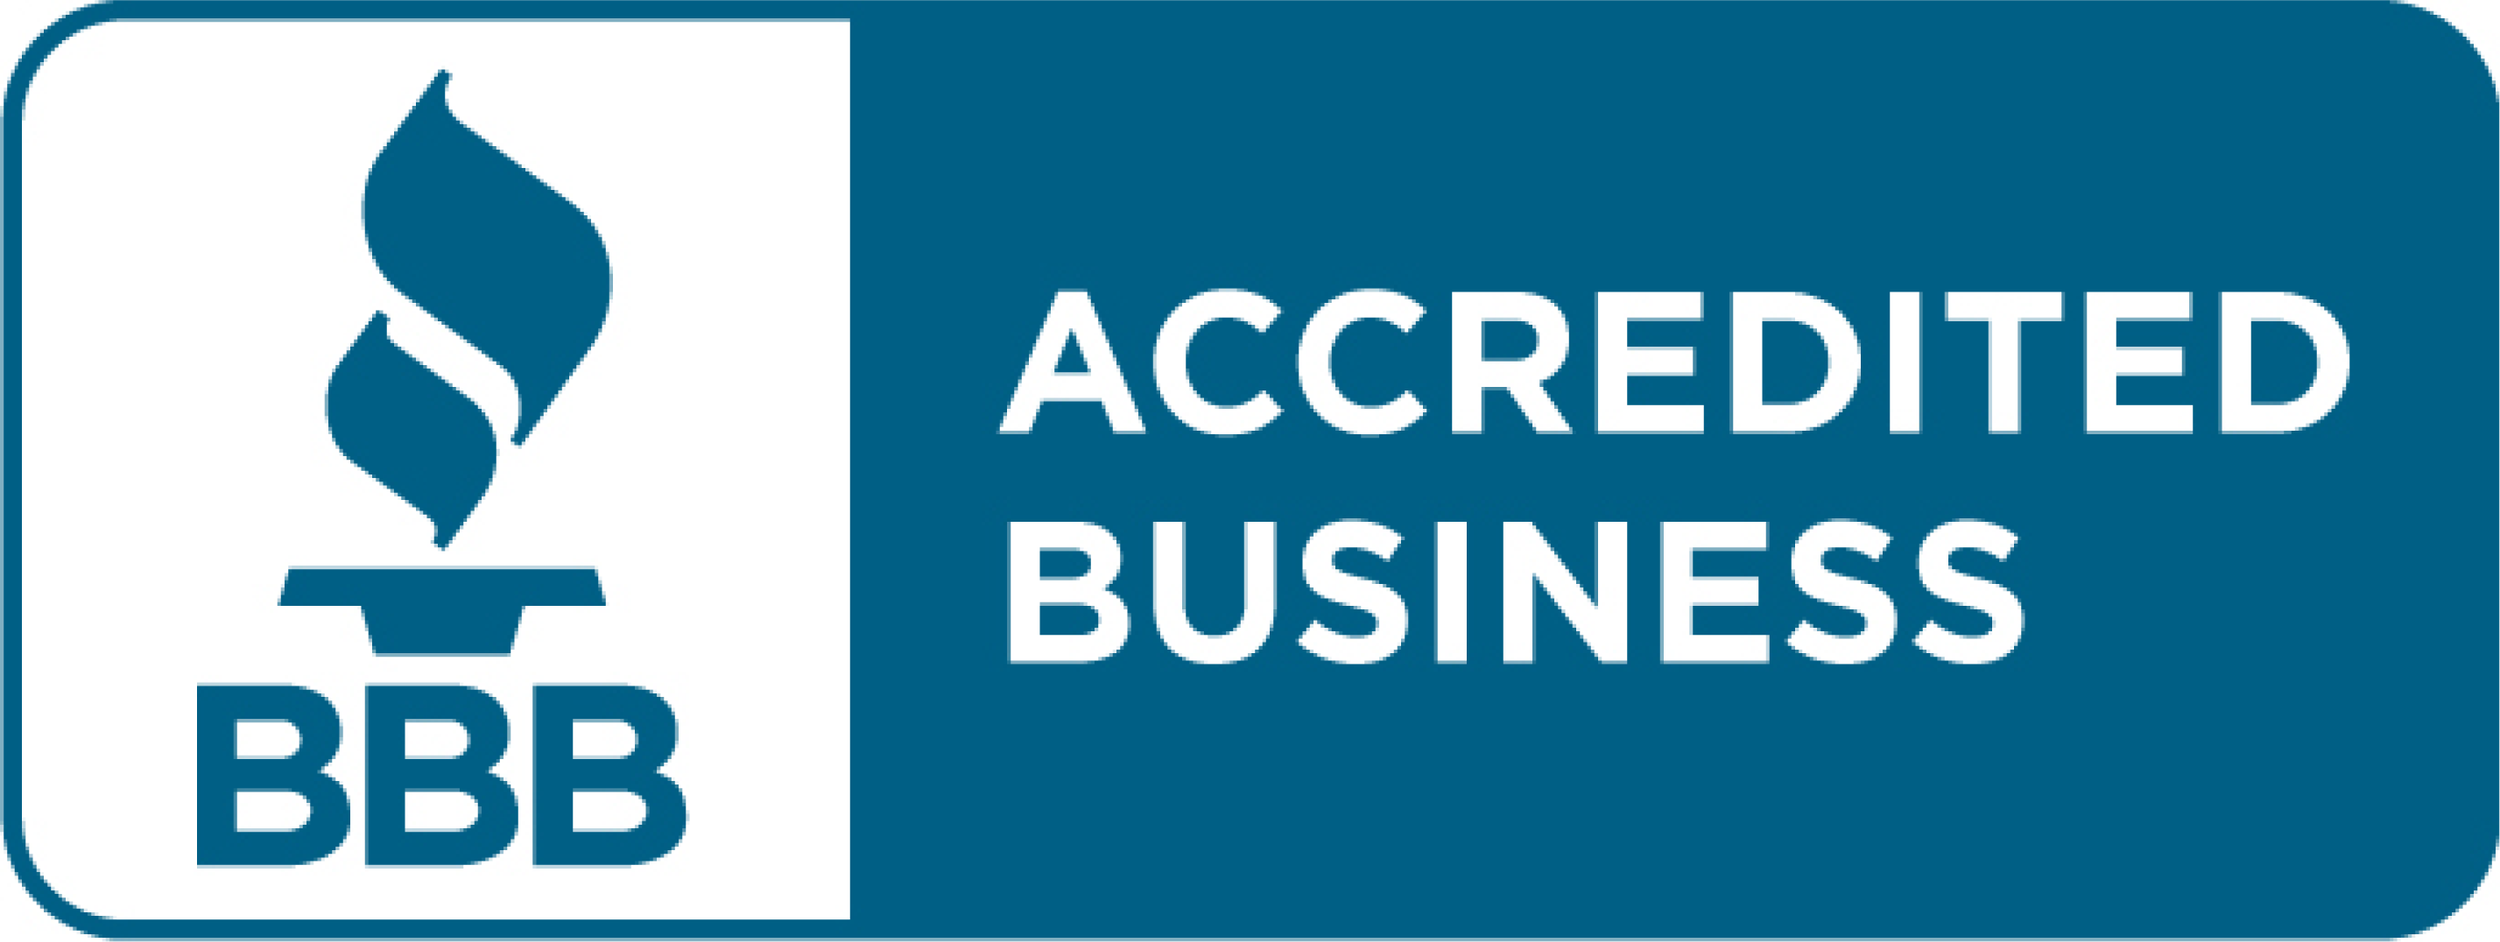 Accredited-Seals-Horizontal-Blue-BBB.png